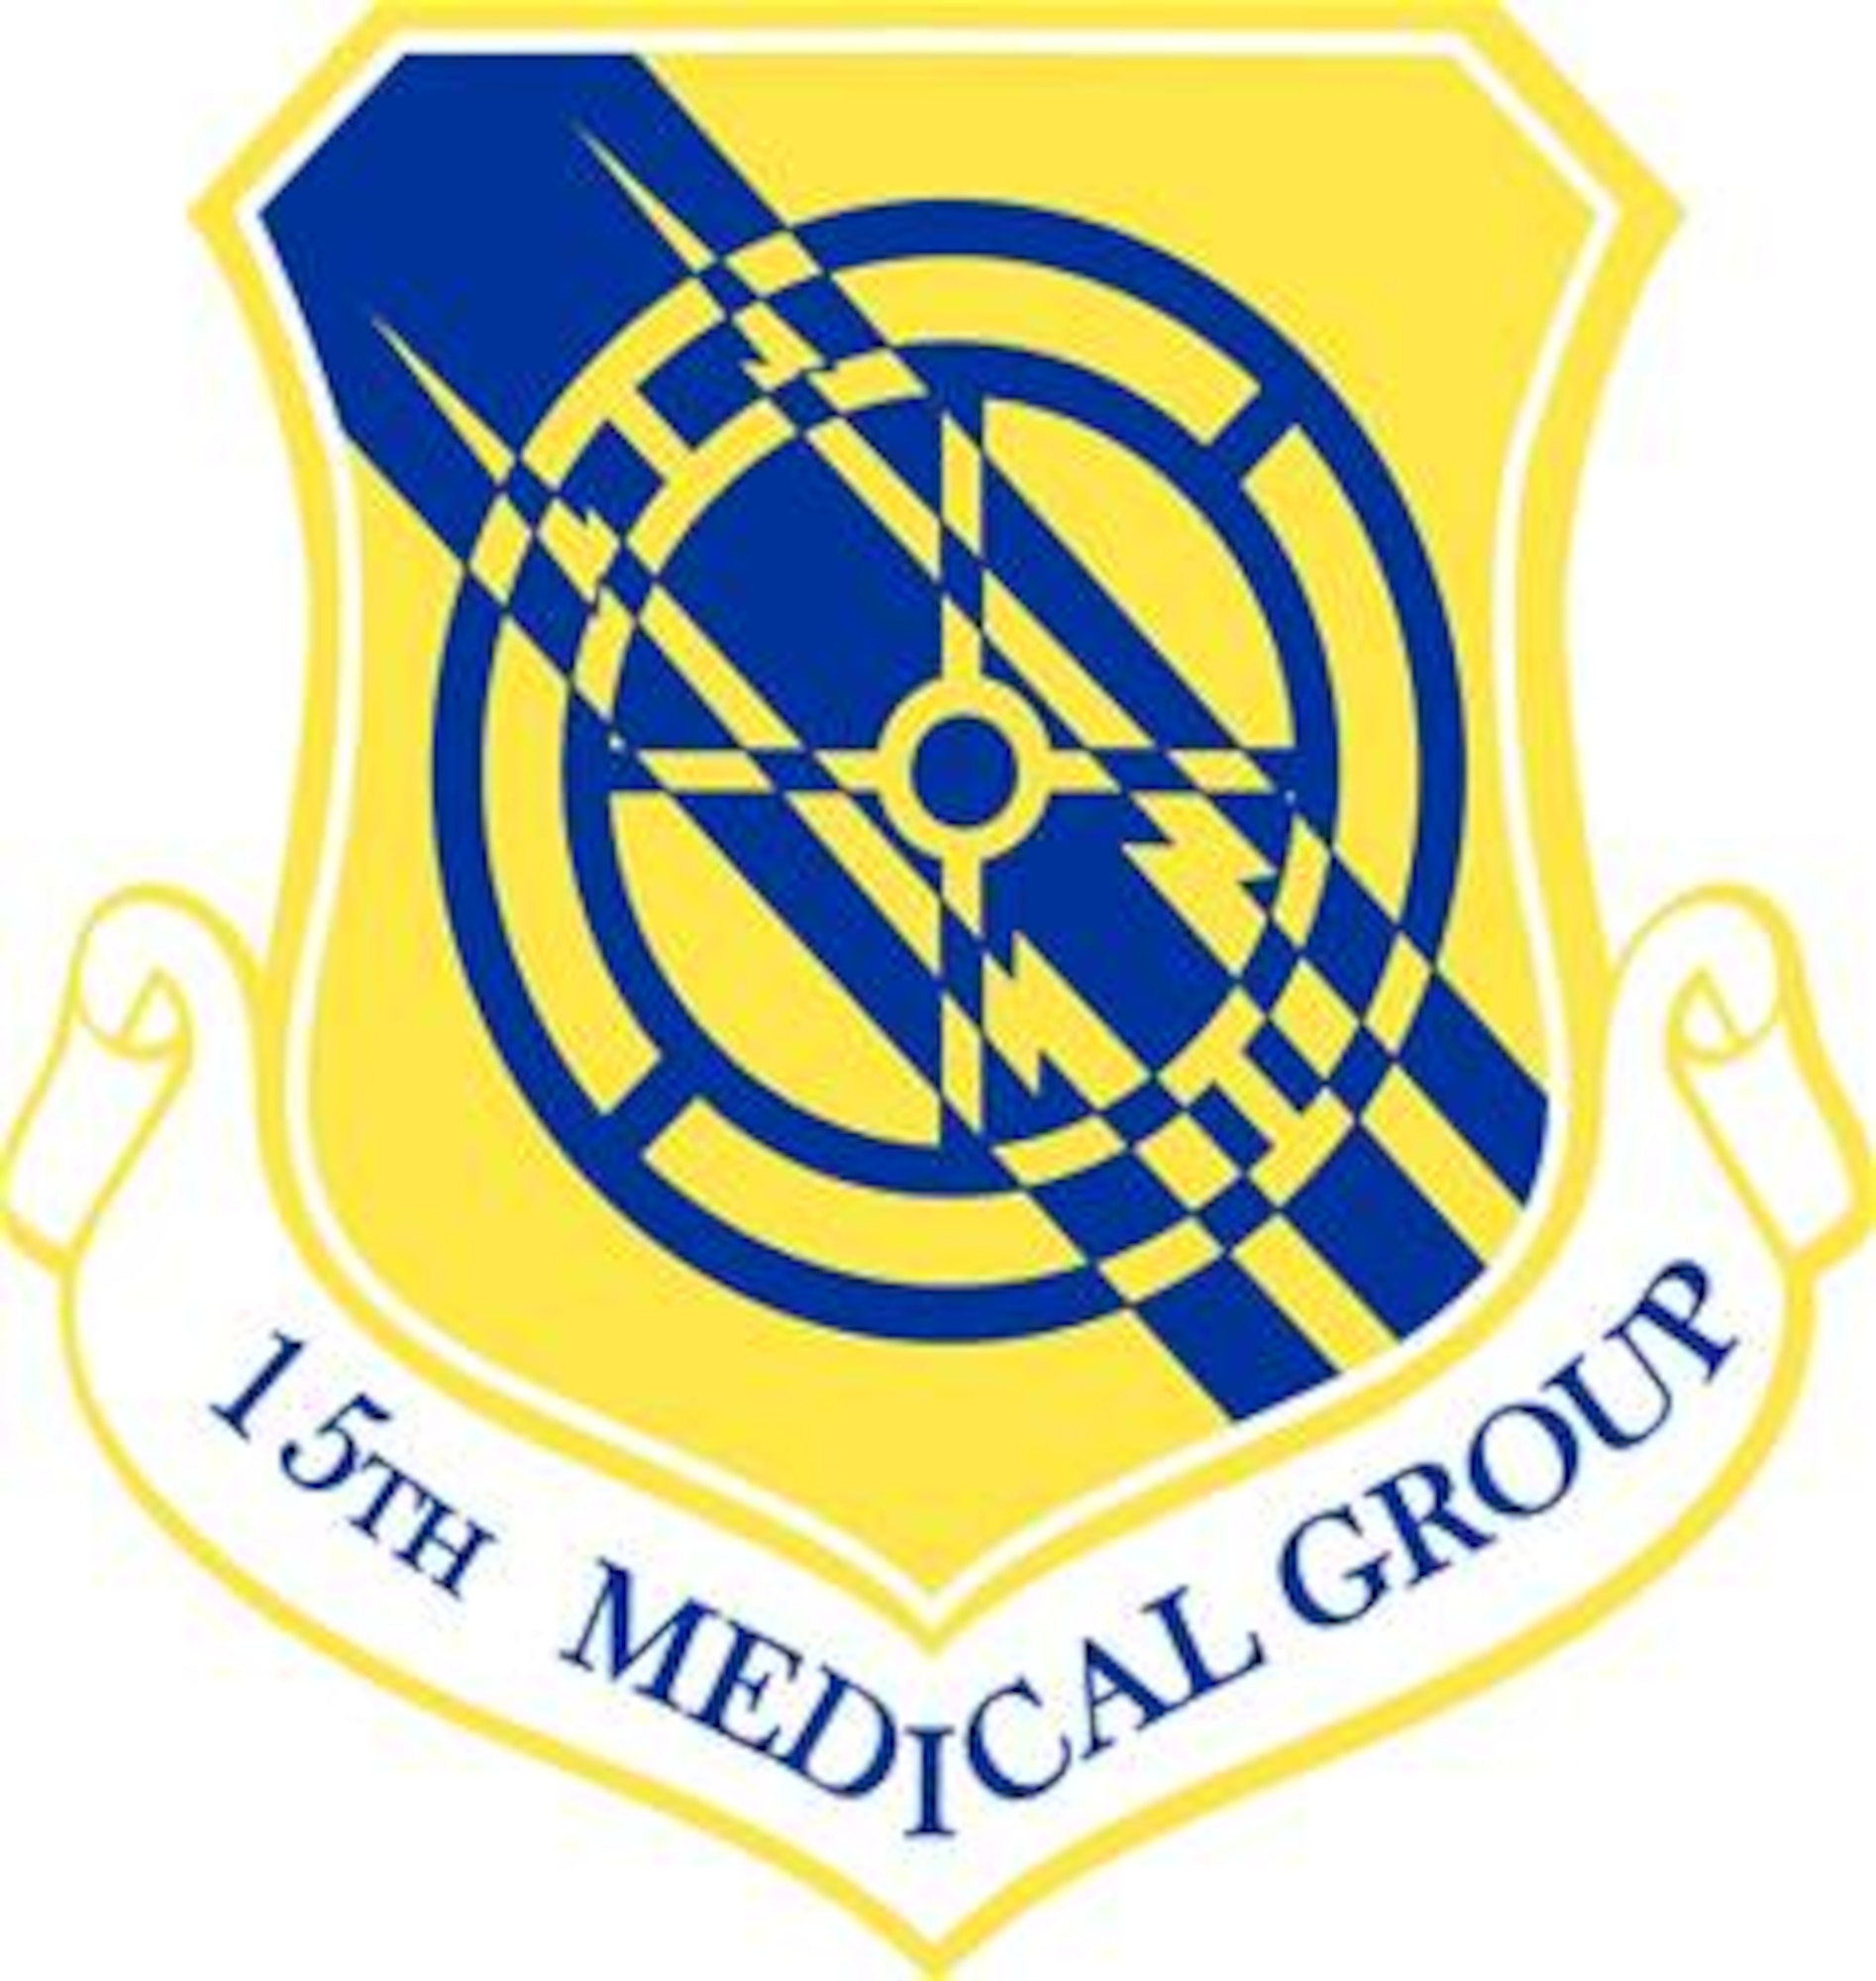 The shield of the 15th Medical Group.